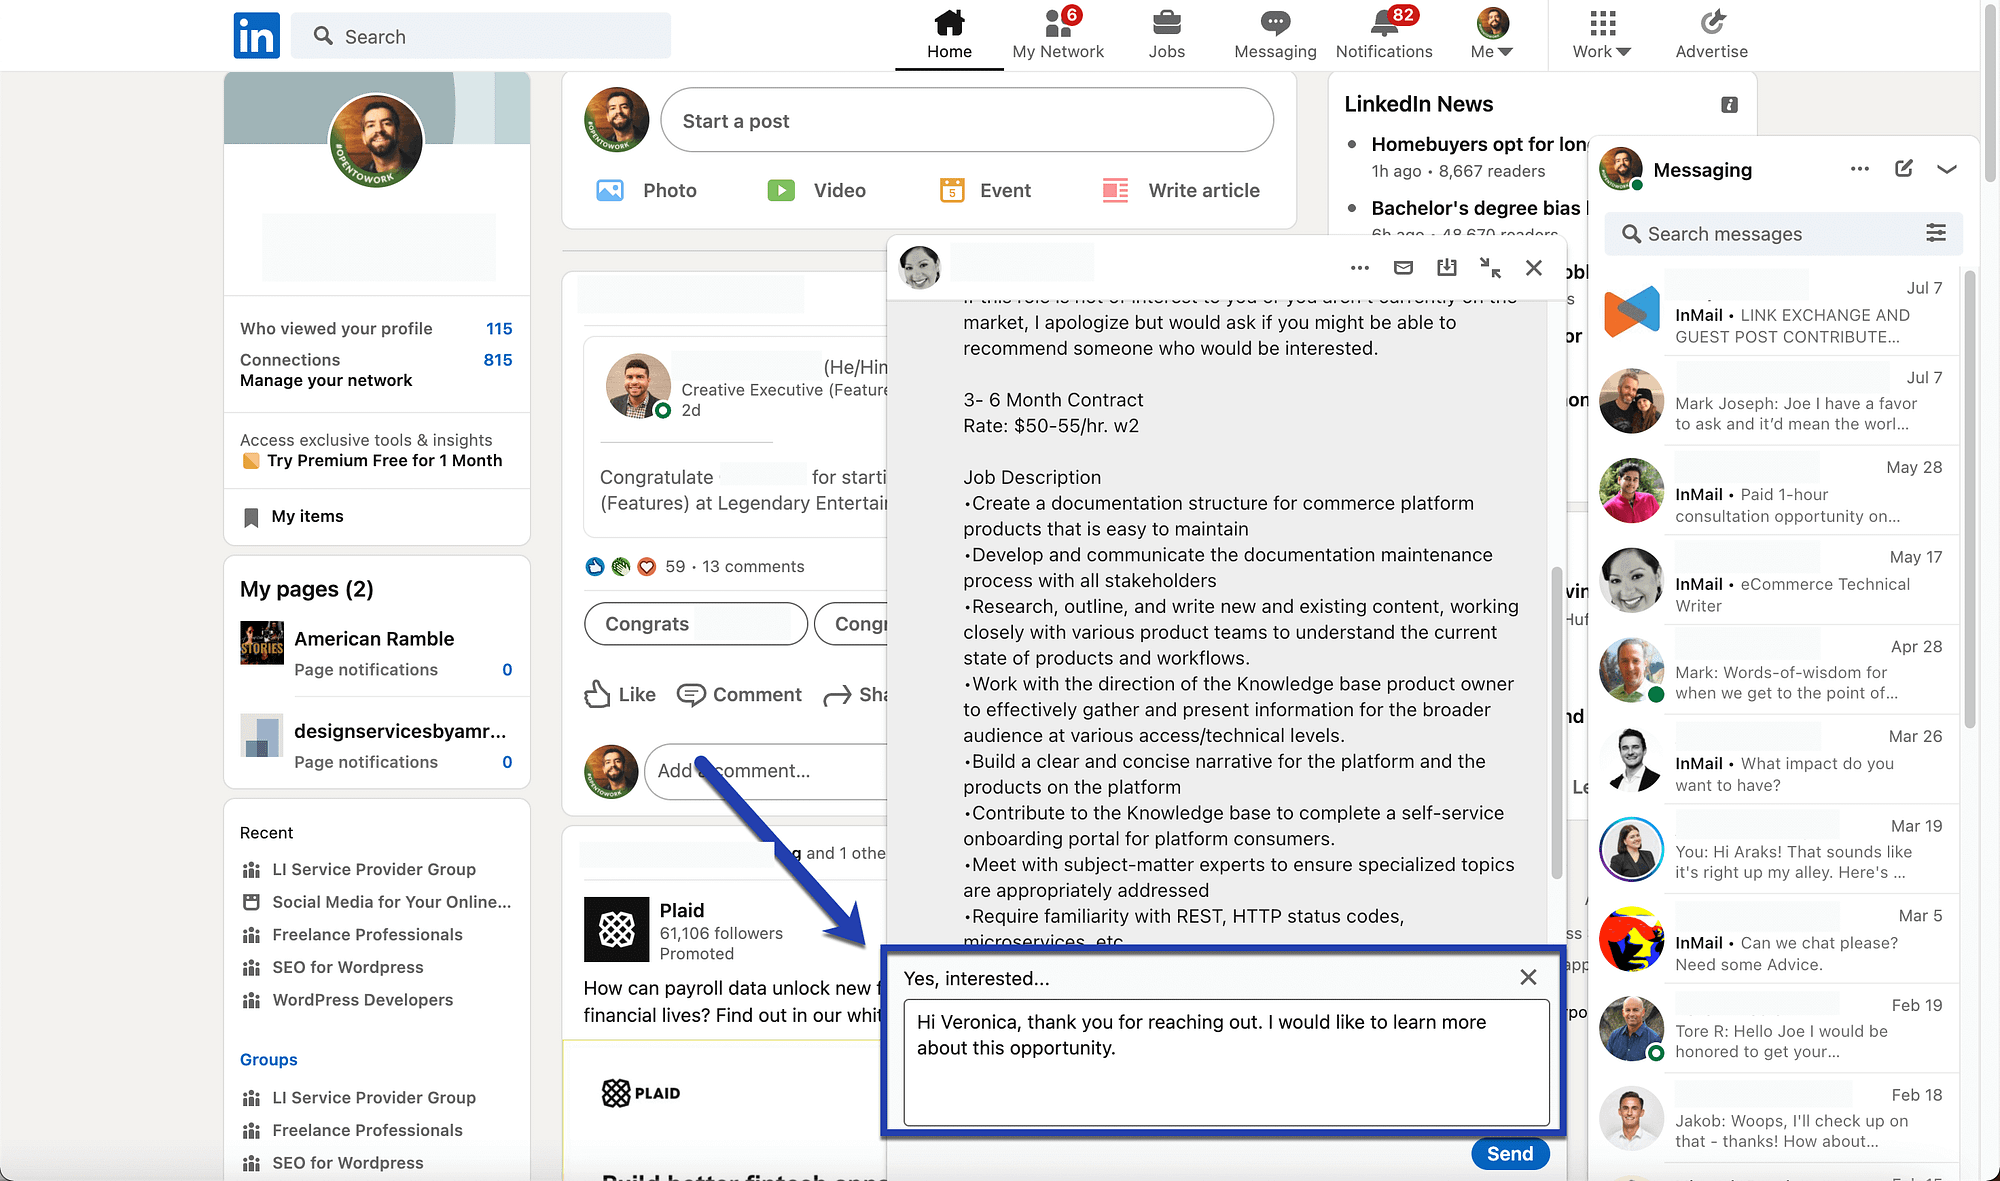 automated response in LinkedIn Messages